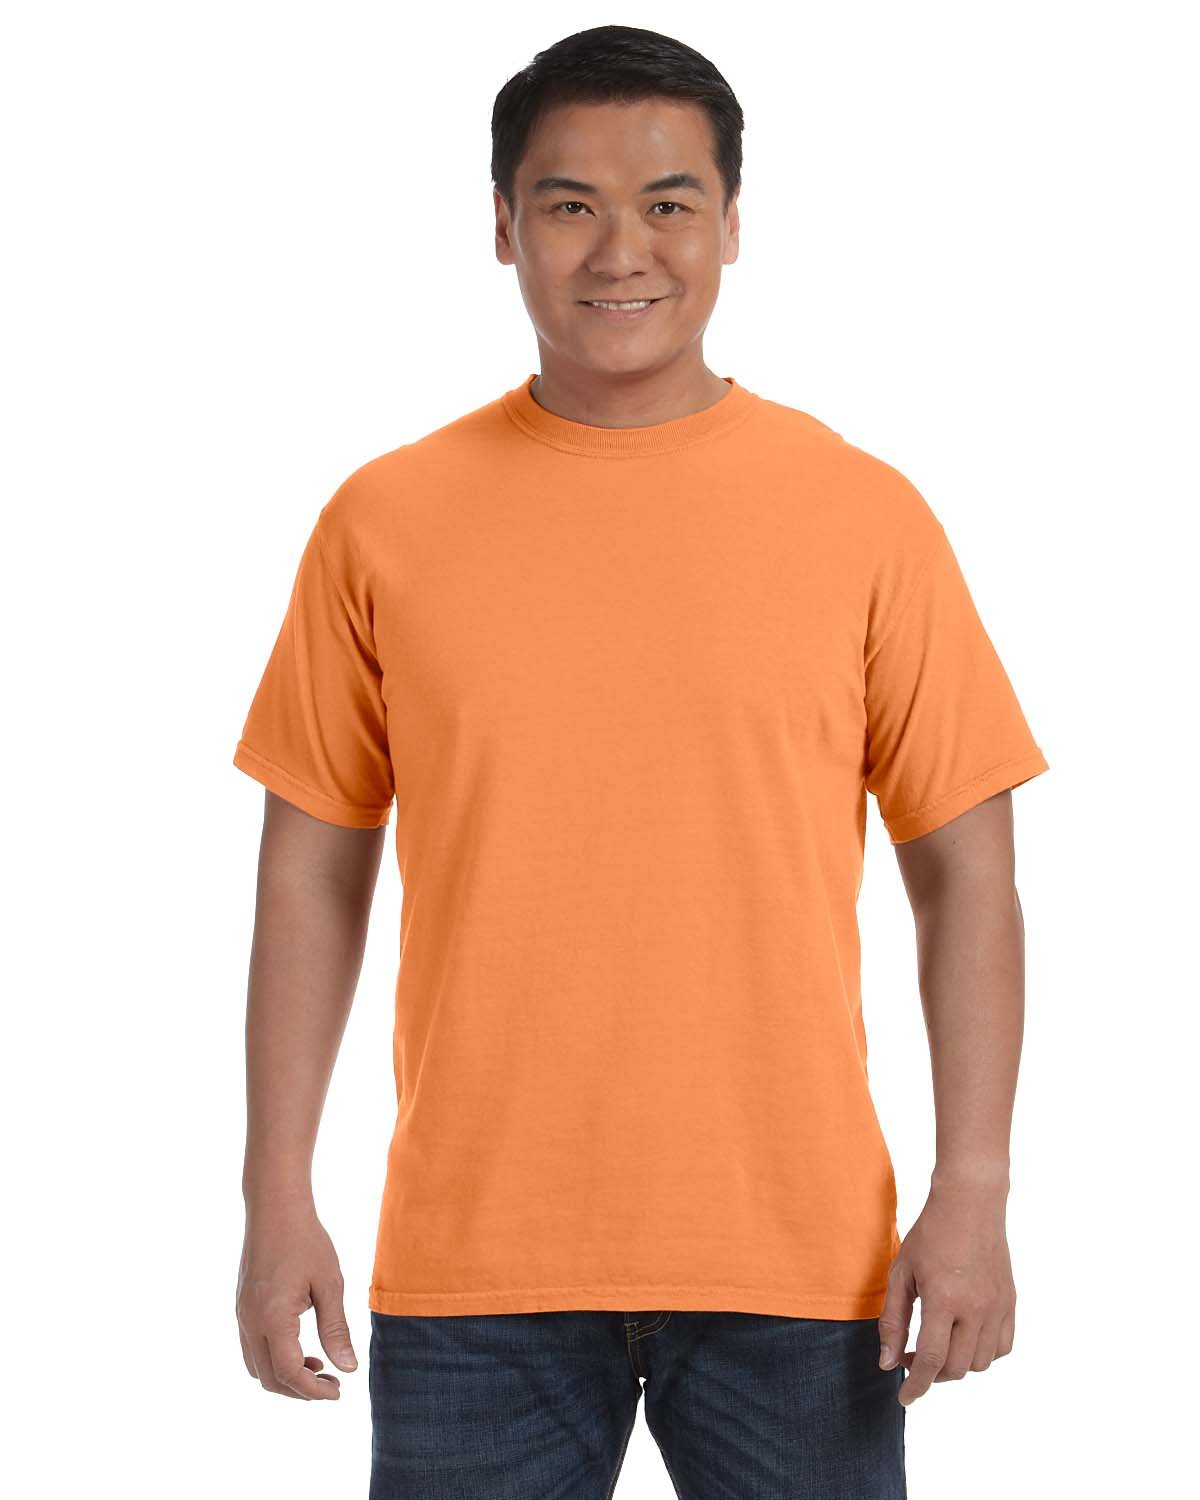 1717 Comfort Colors - Garment Dyed Heavyweight T-Shirt - From $4.73